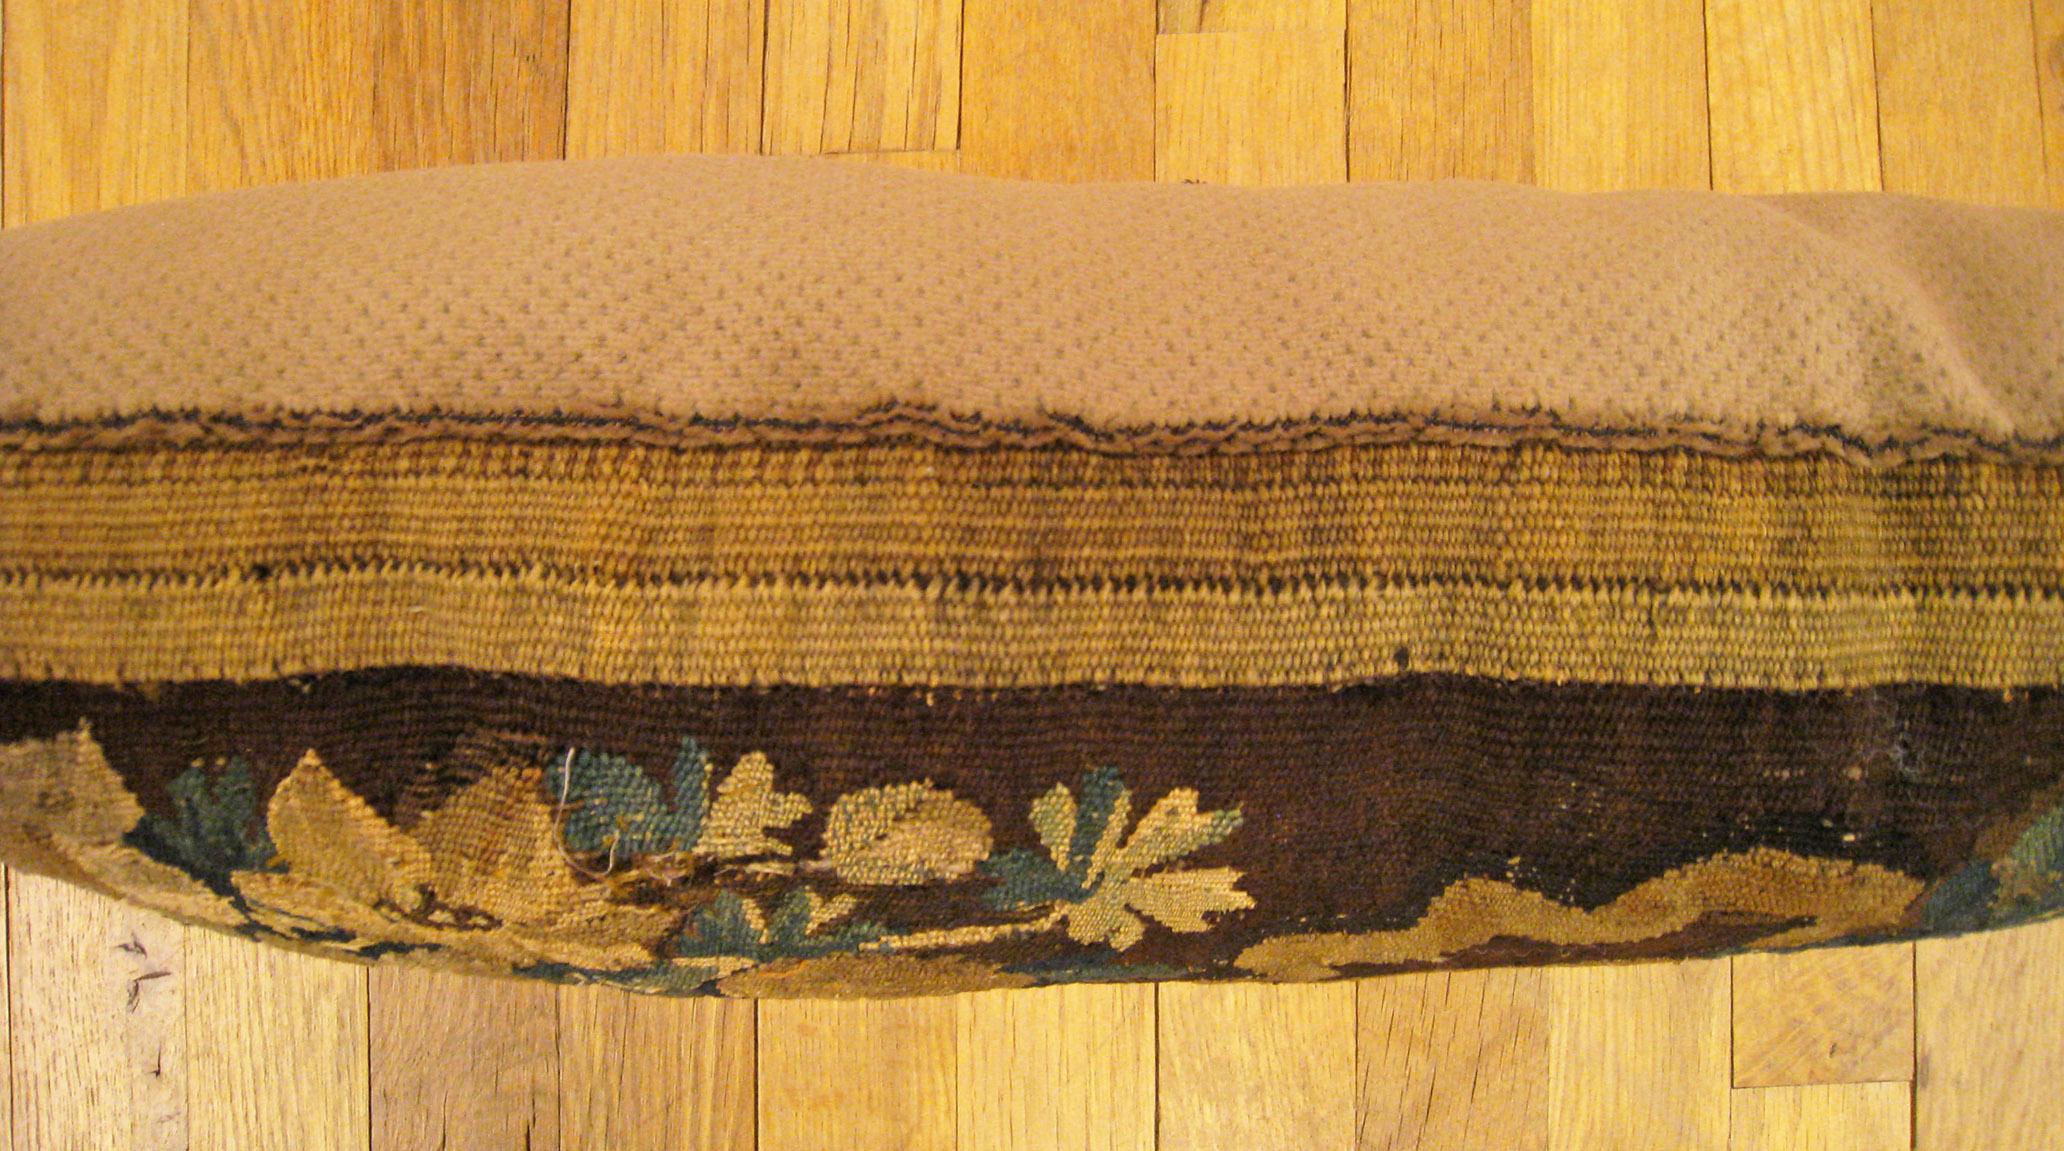 Decorative Antique 18th Century Tapestry Pillow with Floral Elements Allover In Good Condition For Sale In New York, NY